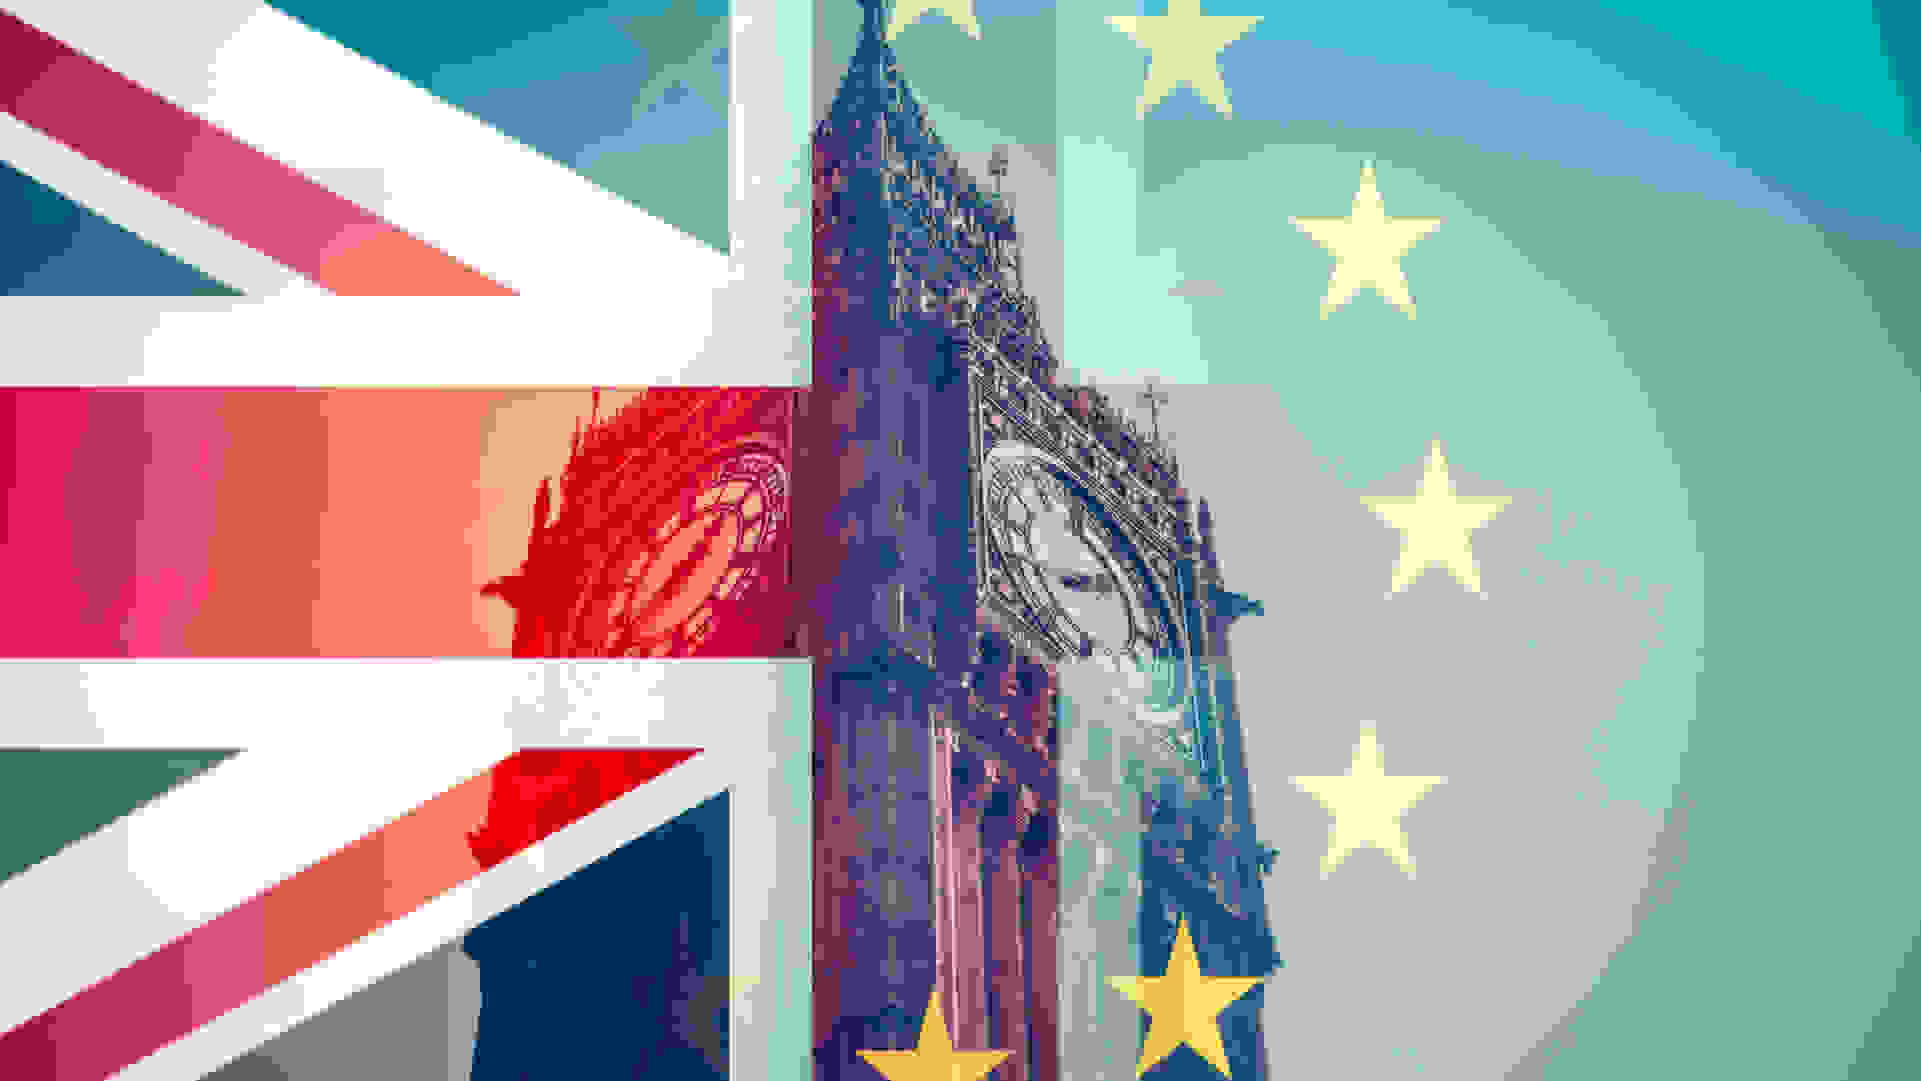 EU and UK flags superimposed on Big Ben, UK Parliament, Westminster CC-BY-ND